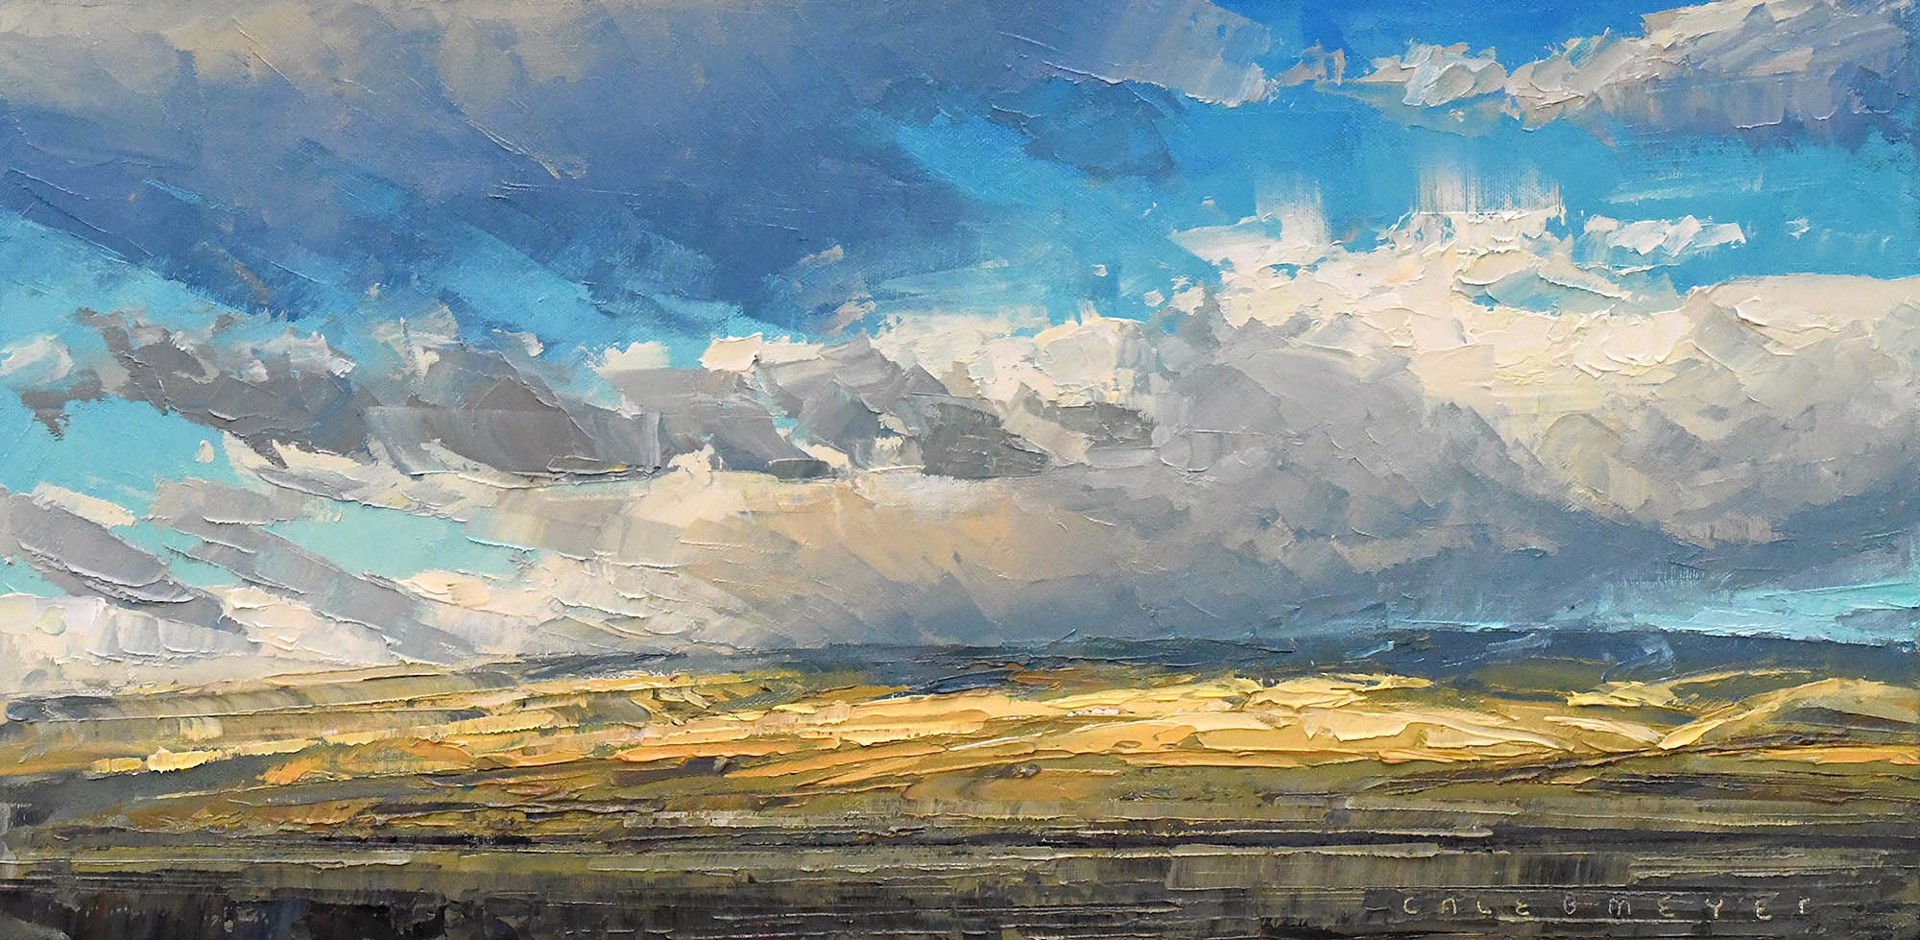 Original Oil Painting By Caleb Meyer Featuring A Hill Landscape With Big White Clouds